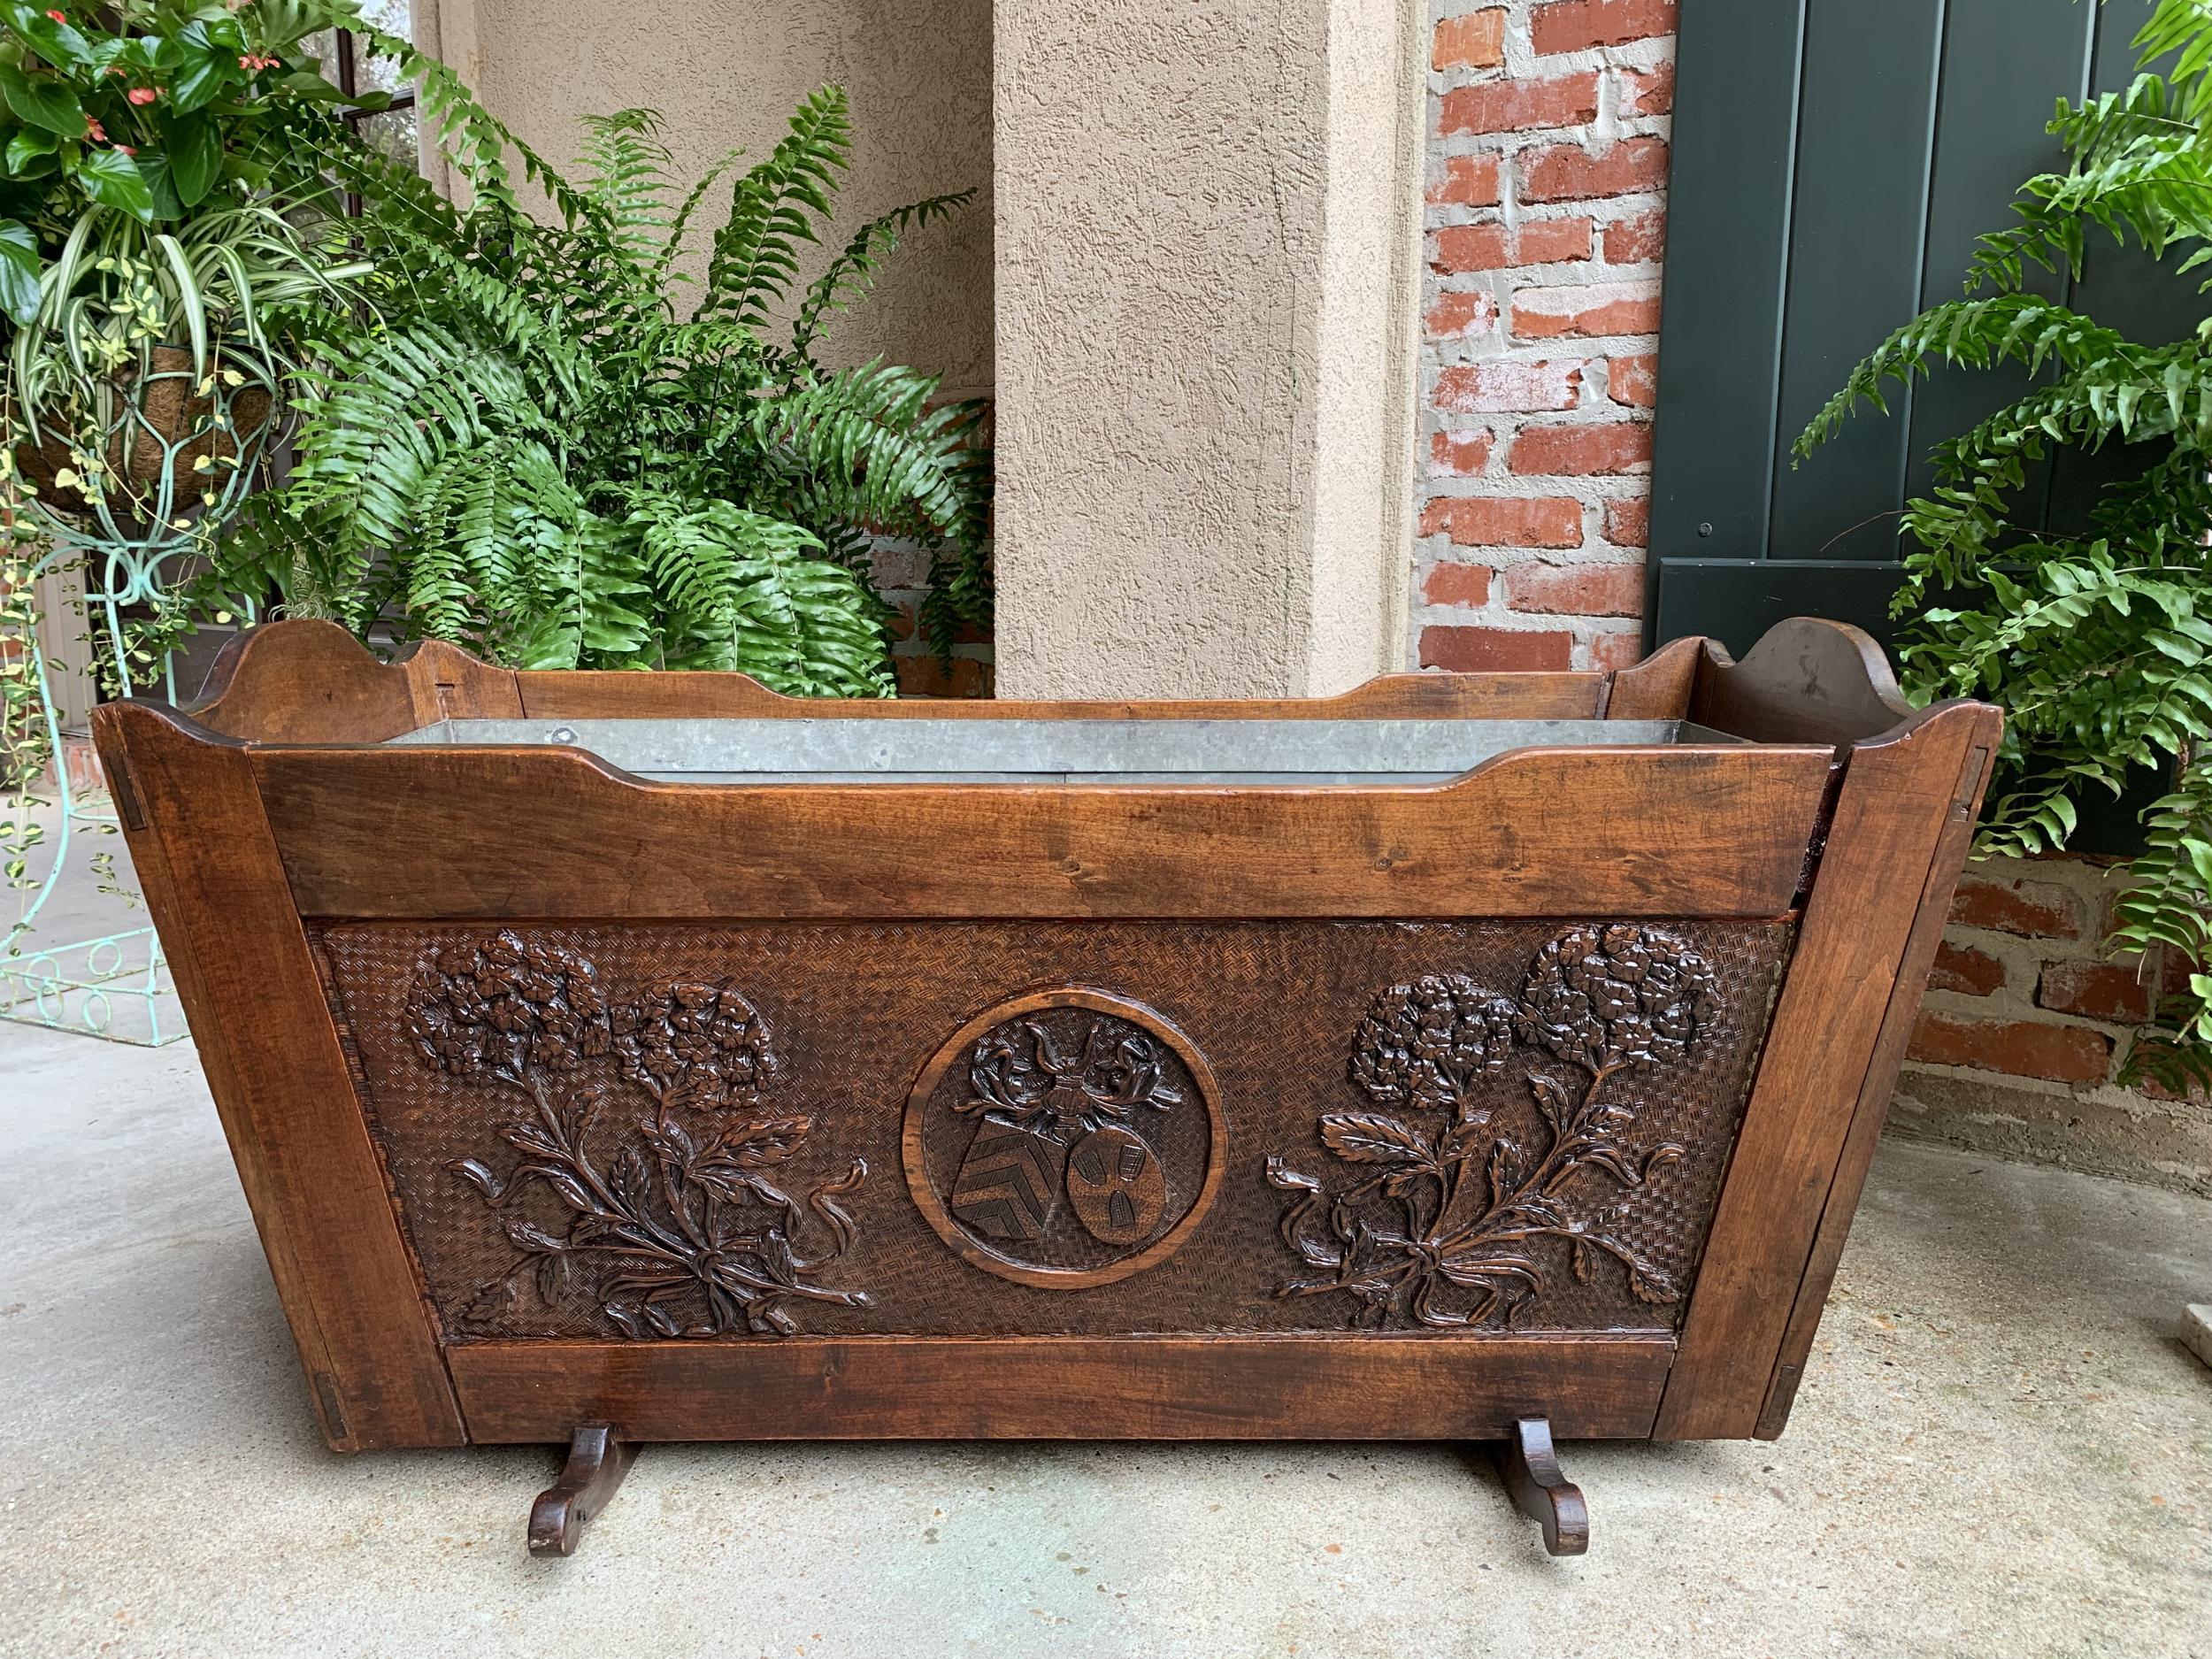 19th century French provincial carved oak baby doll crib planter drinks server.

~Direct from France~
~Lovingly carved family heirloom from the 1800s, this beautiful baby crib is carved on all sides, and has been modified for potential use as a